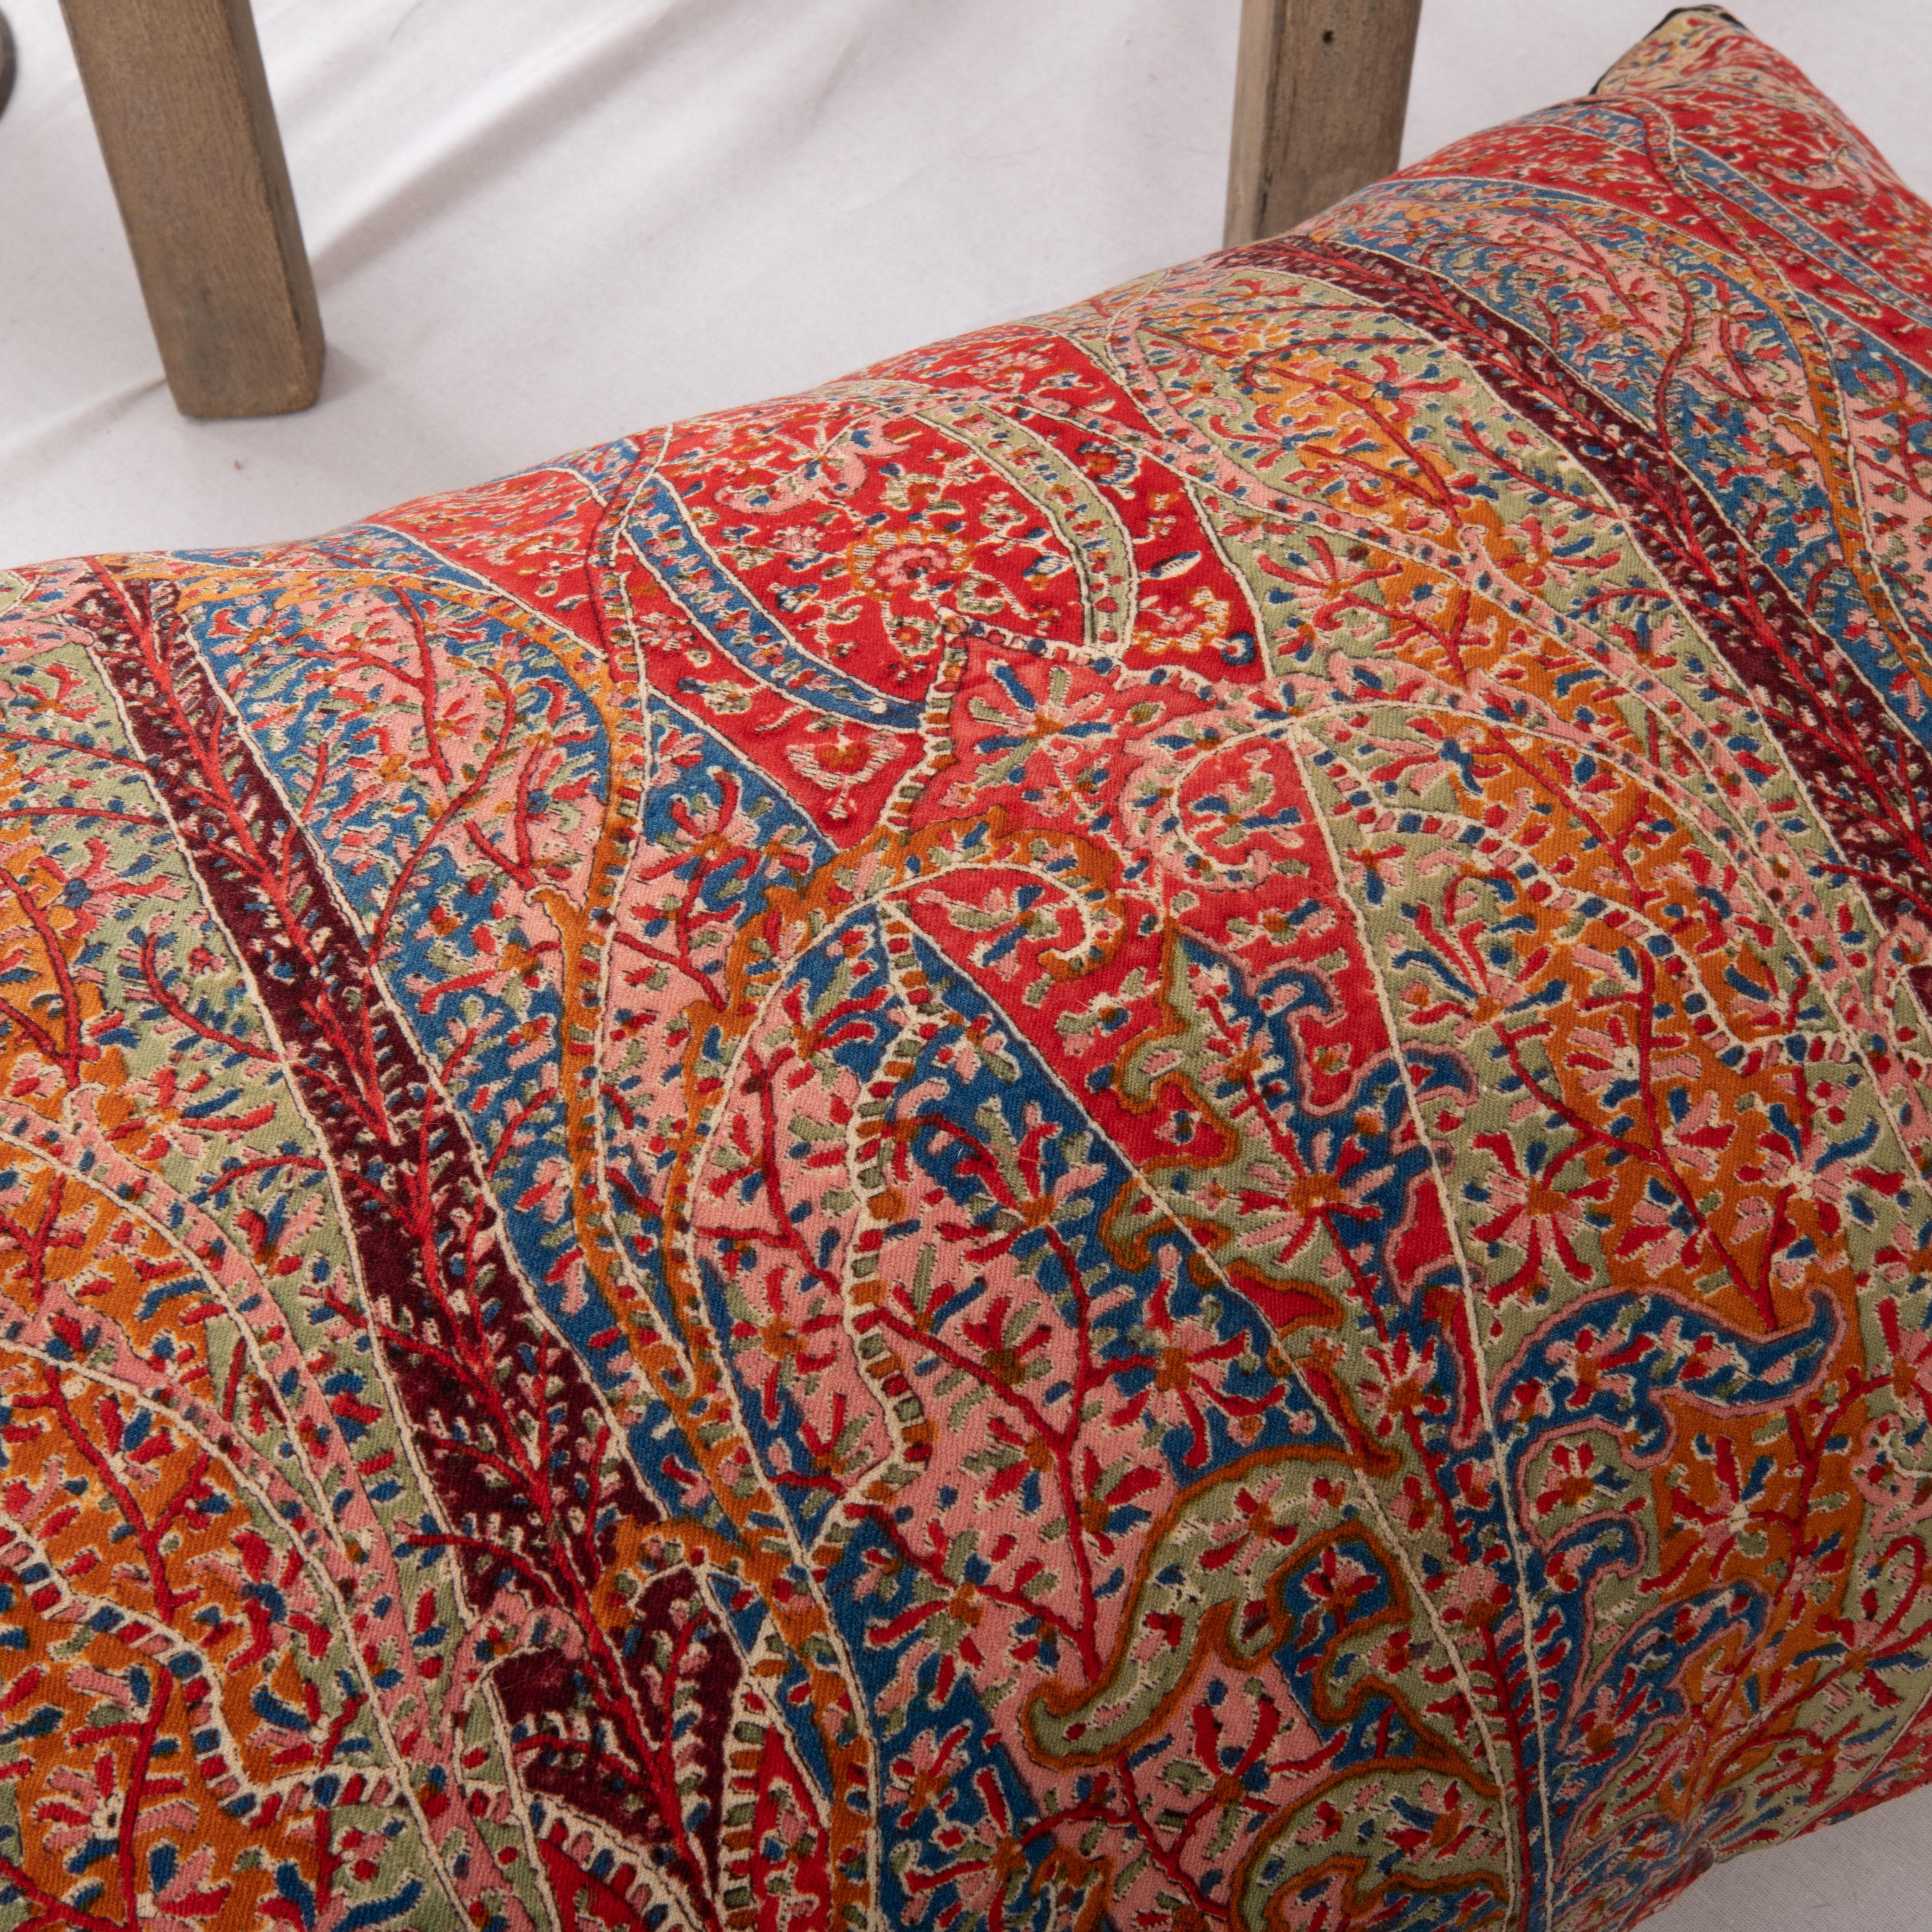 Woven Pillow Cover Made from a an Antique Printed Scottish Paisley Shawl For Sale